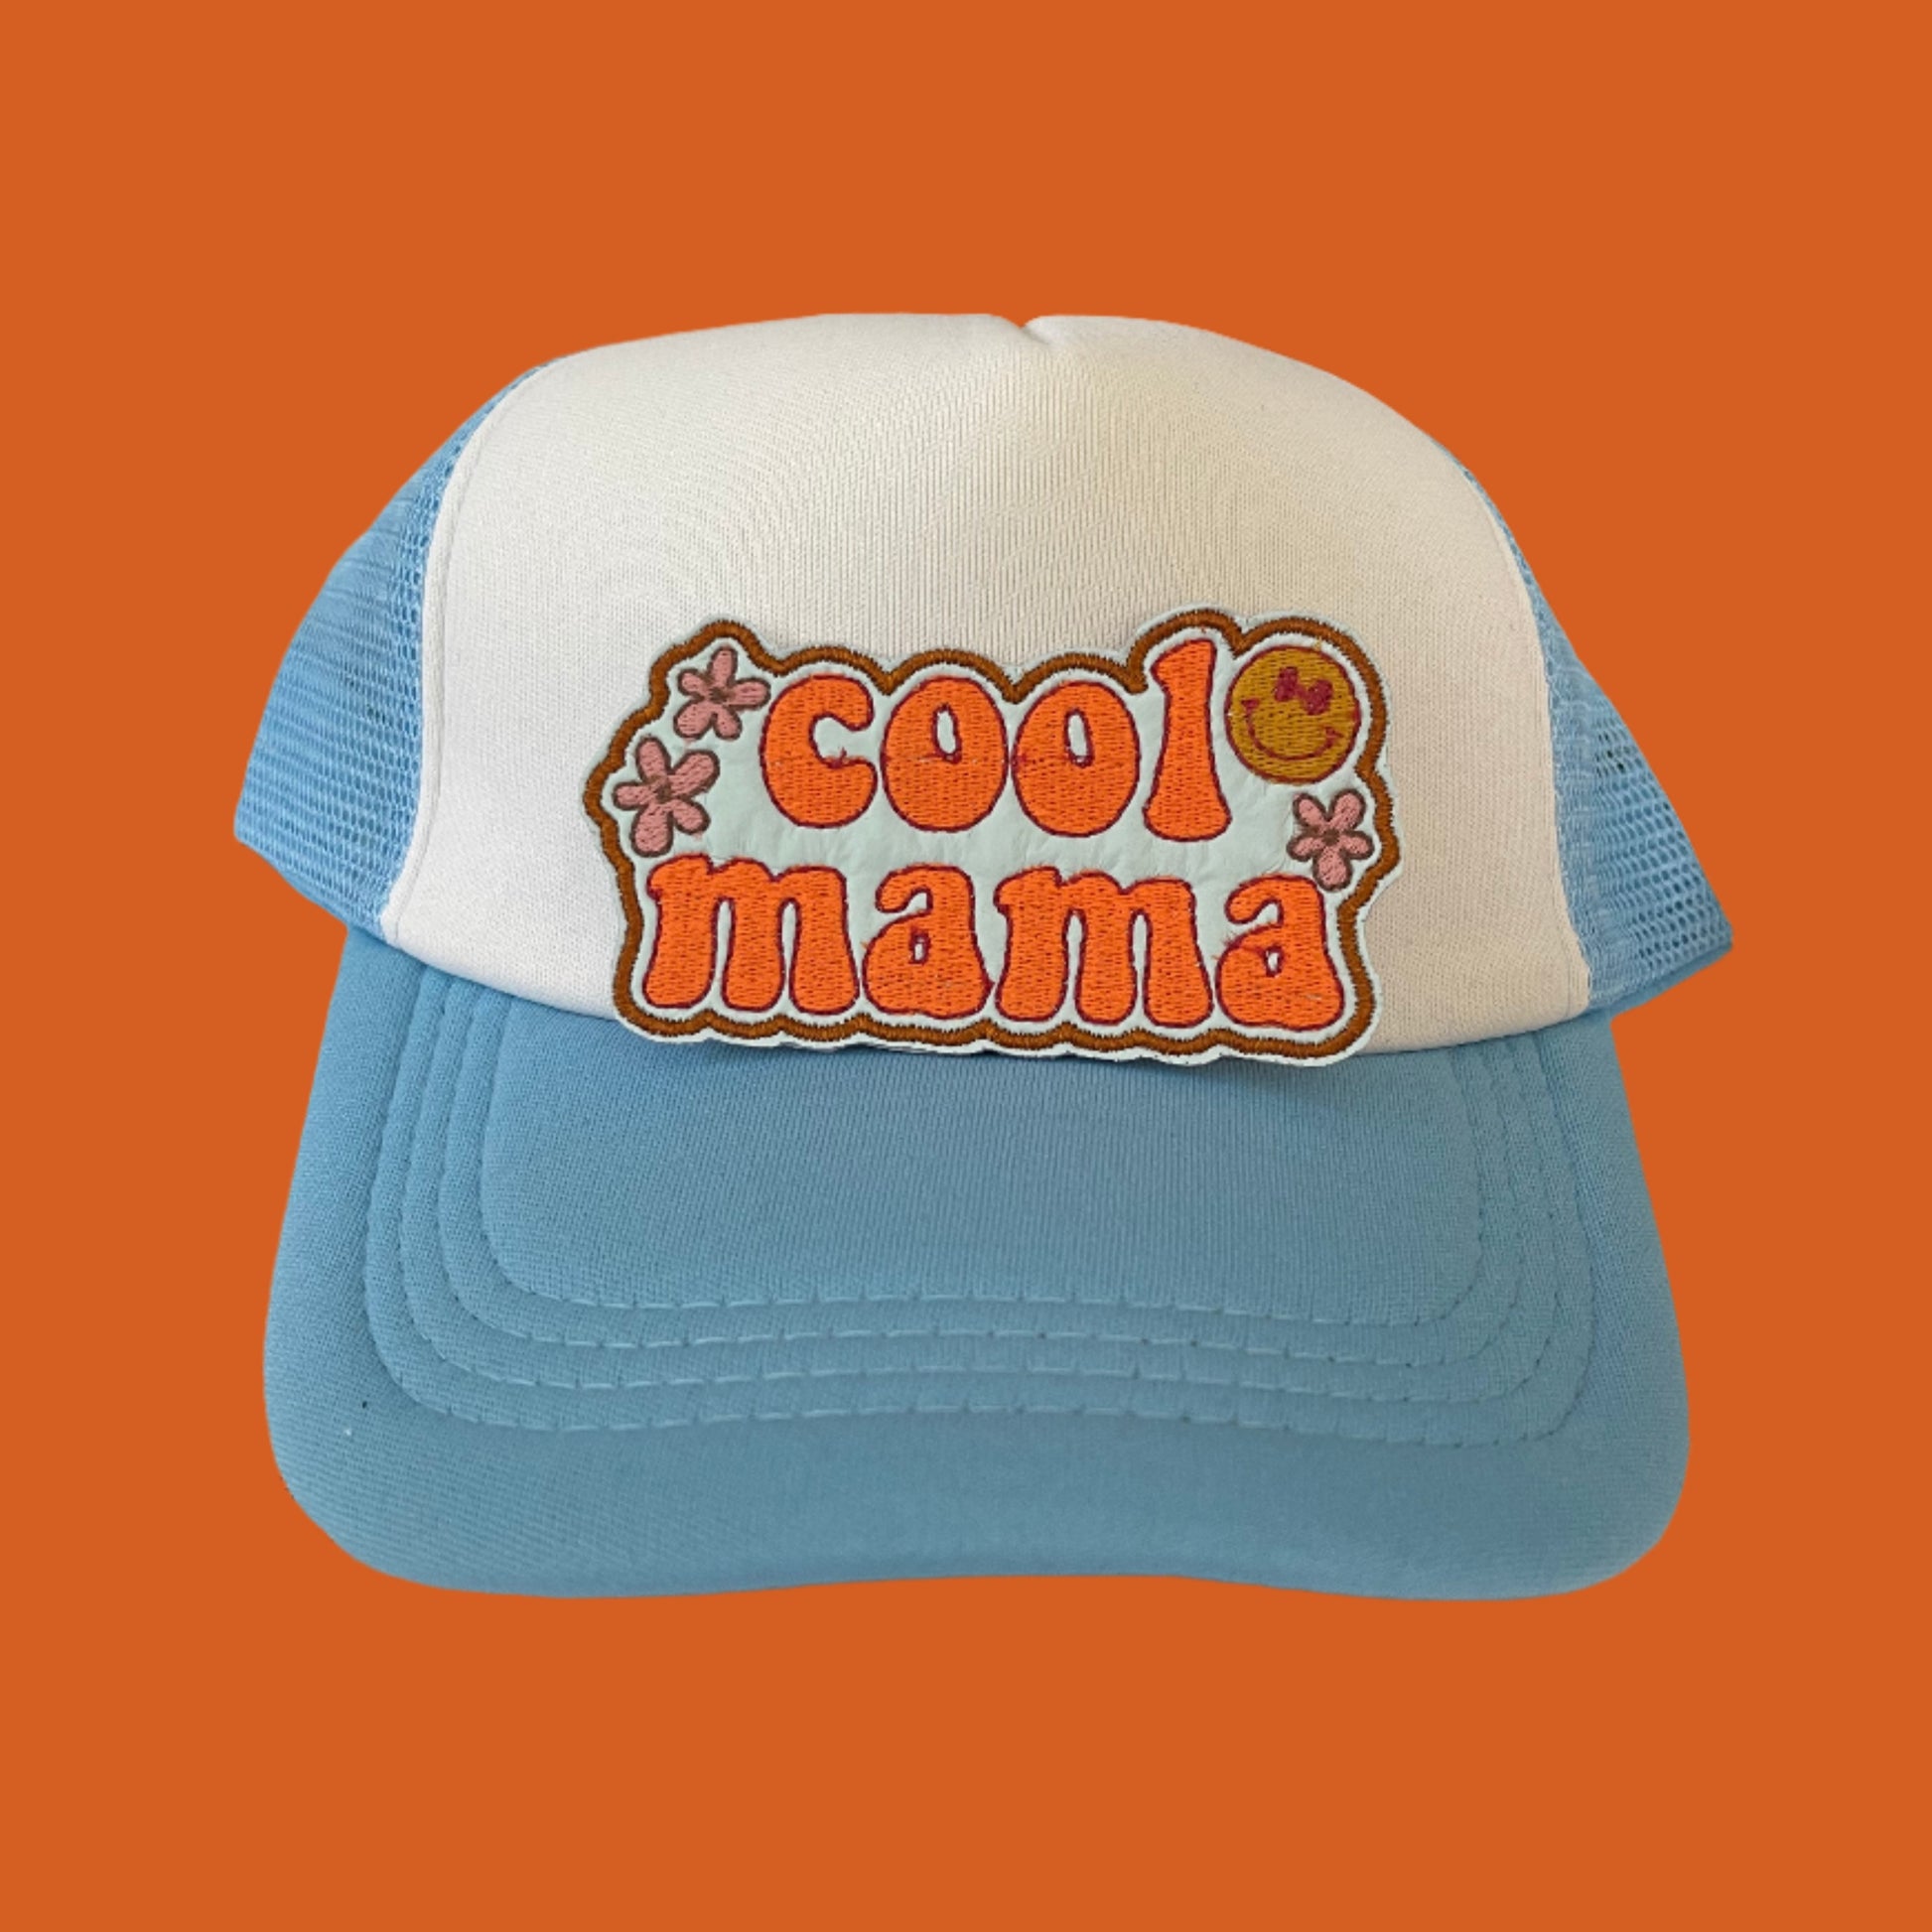 Iron-on patch featuring vibrant orange "cool mama" text with playful flower accents and a smiley face, showcasing a funky and retro design.